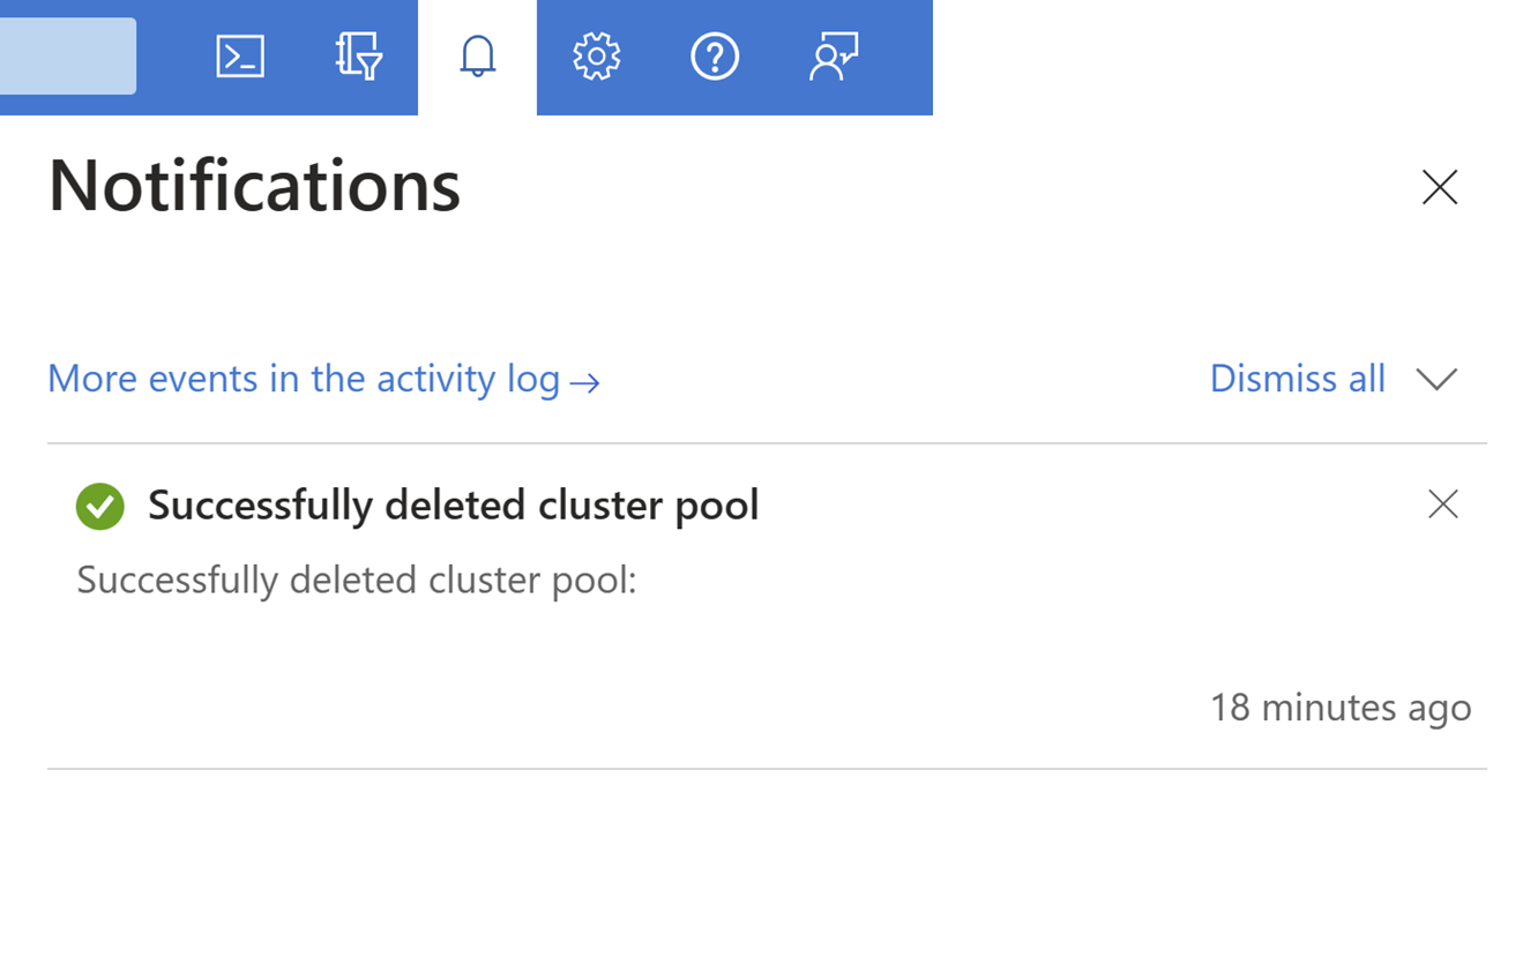 Screenshot showing a notification alert of a cluster pool deletion successful.